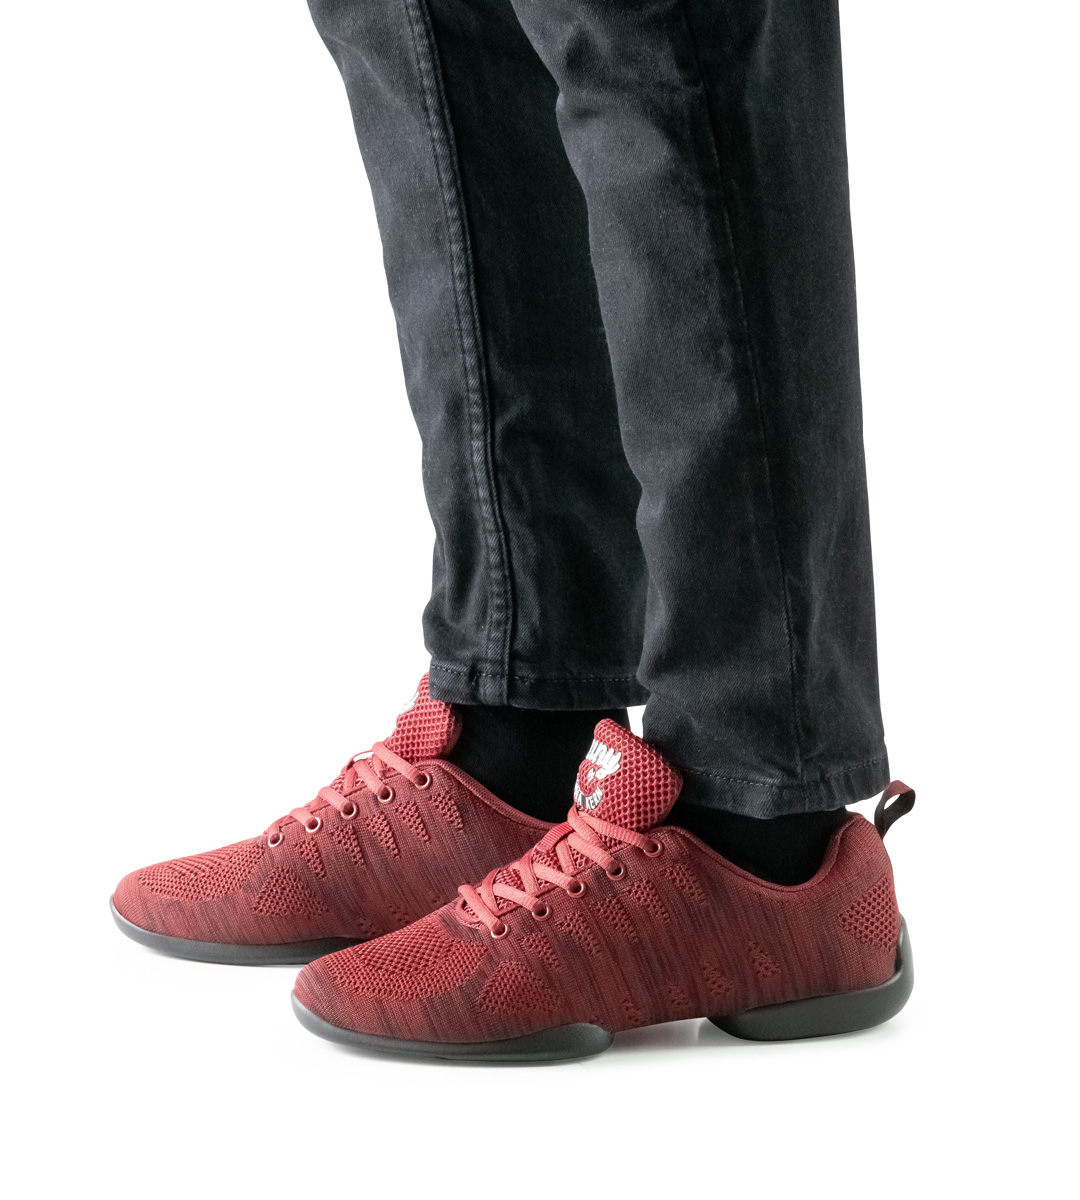 red-black men's dance sneakers from Suny for training